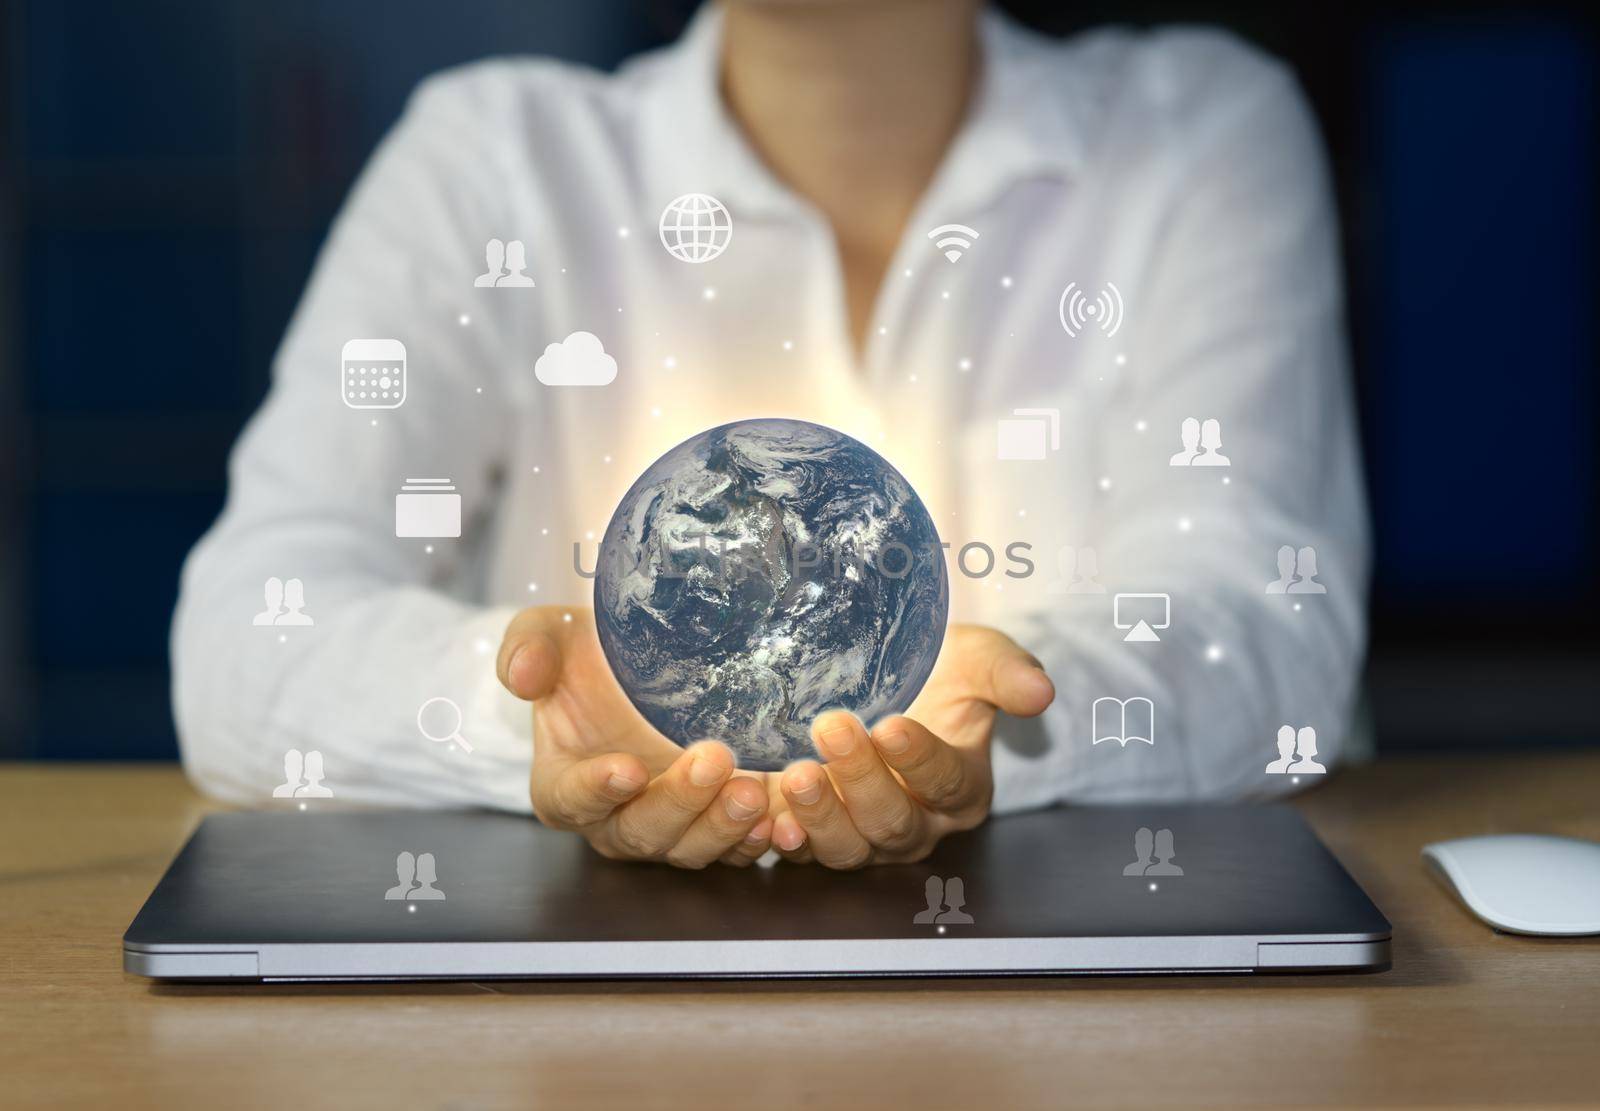 Business people hold the concept world of using the internet to exchange knowledge, cloud storage, and distribute information around the world using laptops. Elements of this image furnished by NASA.